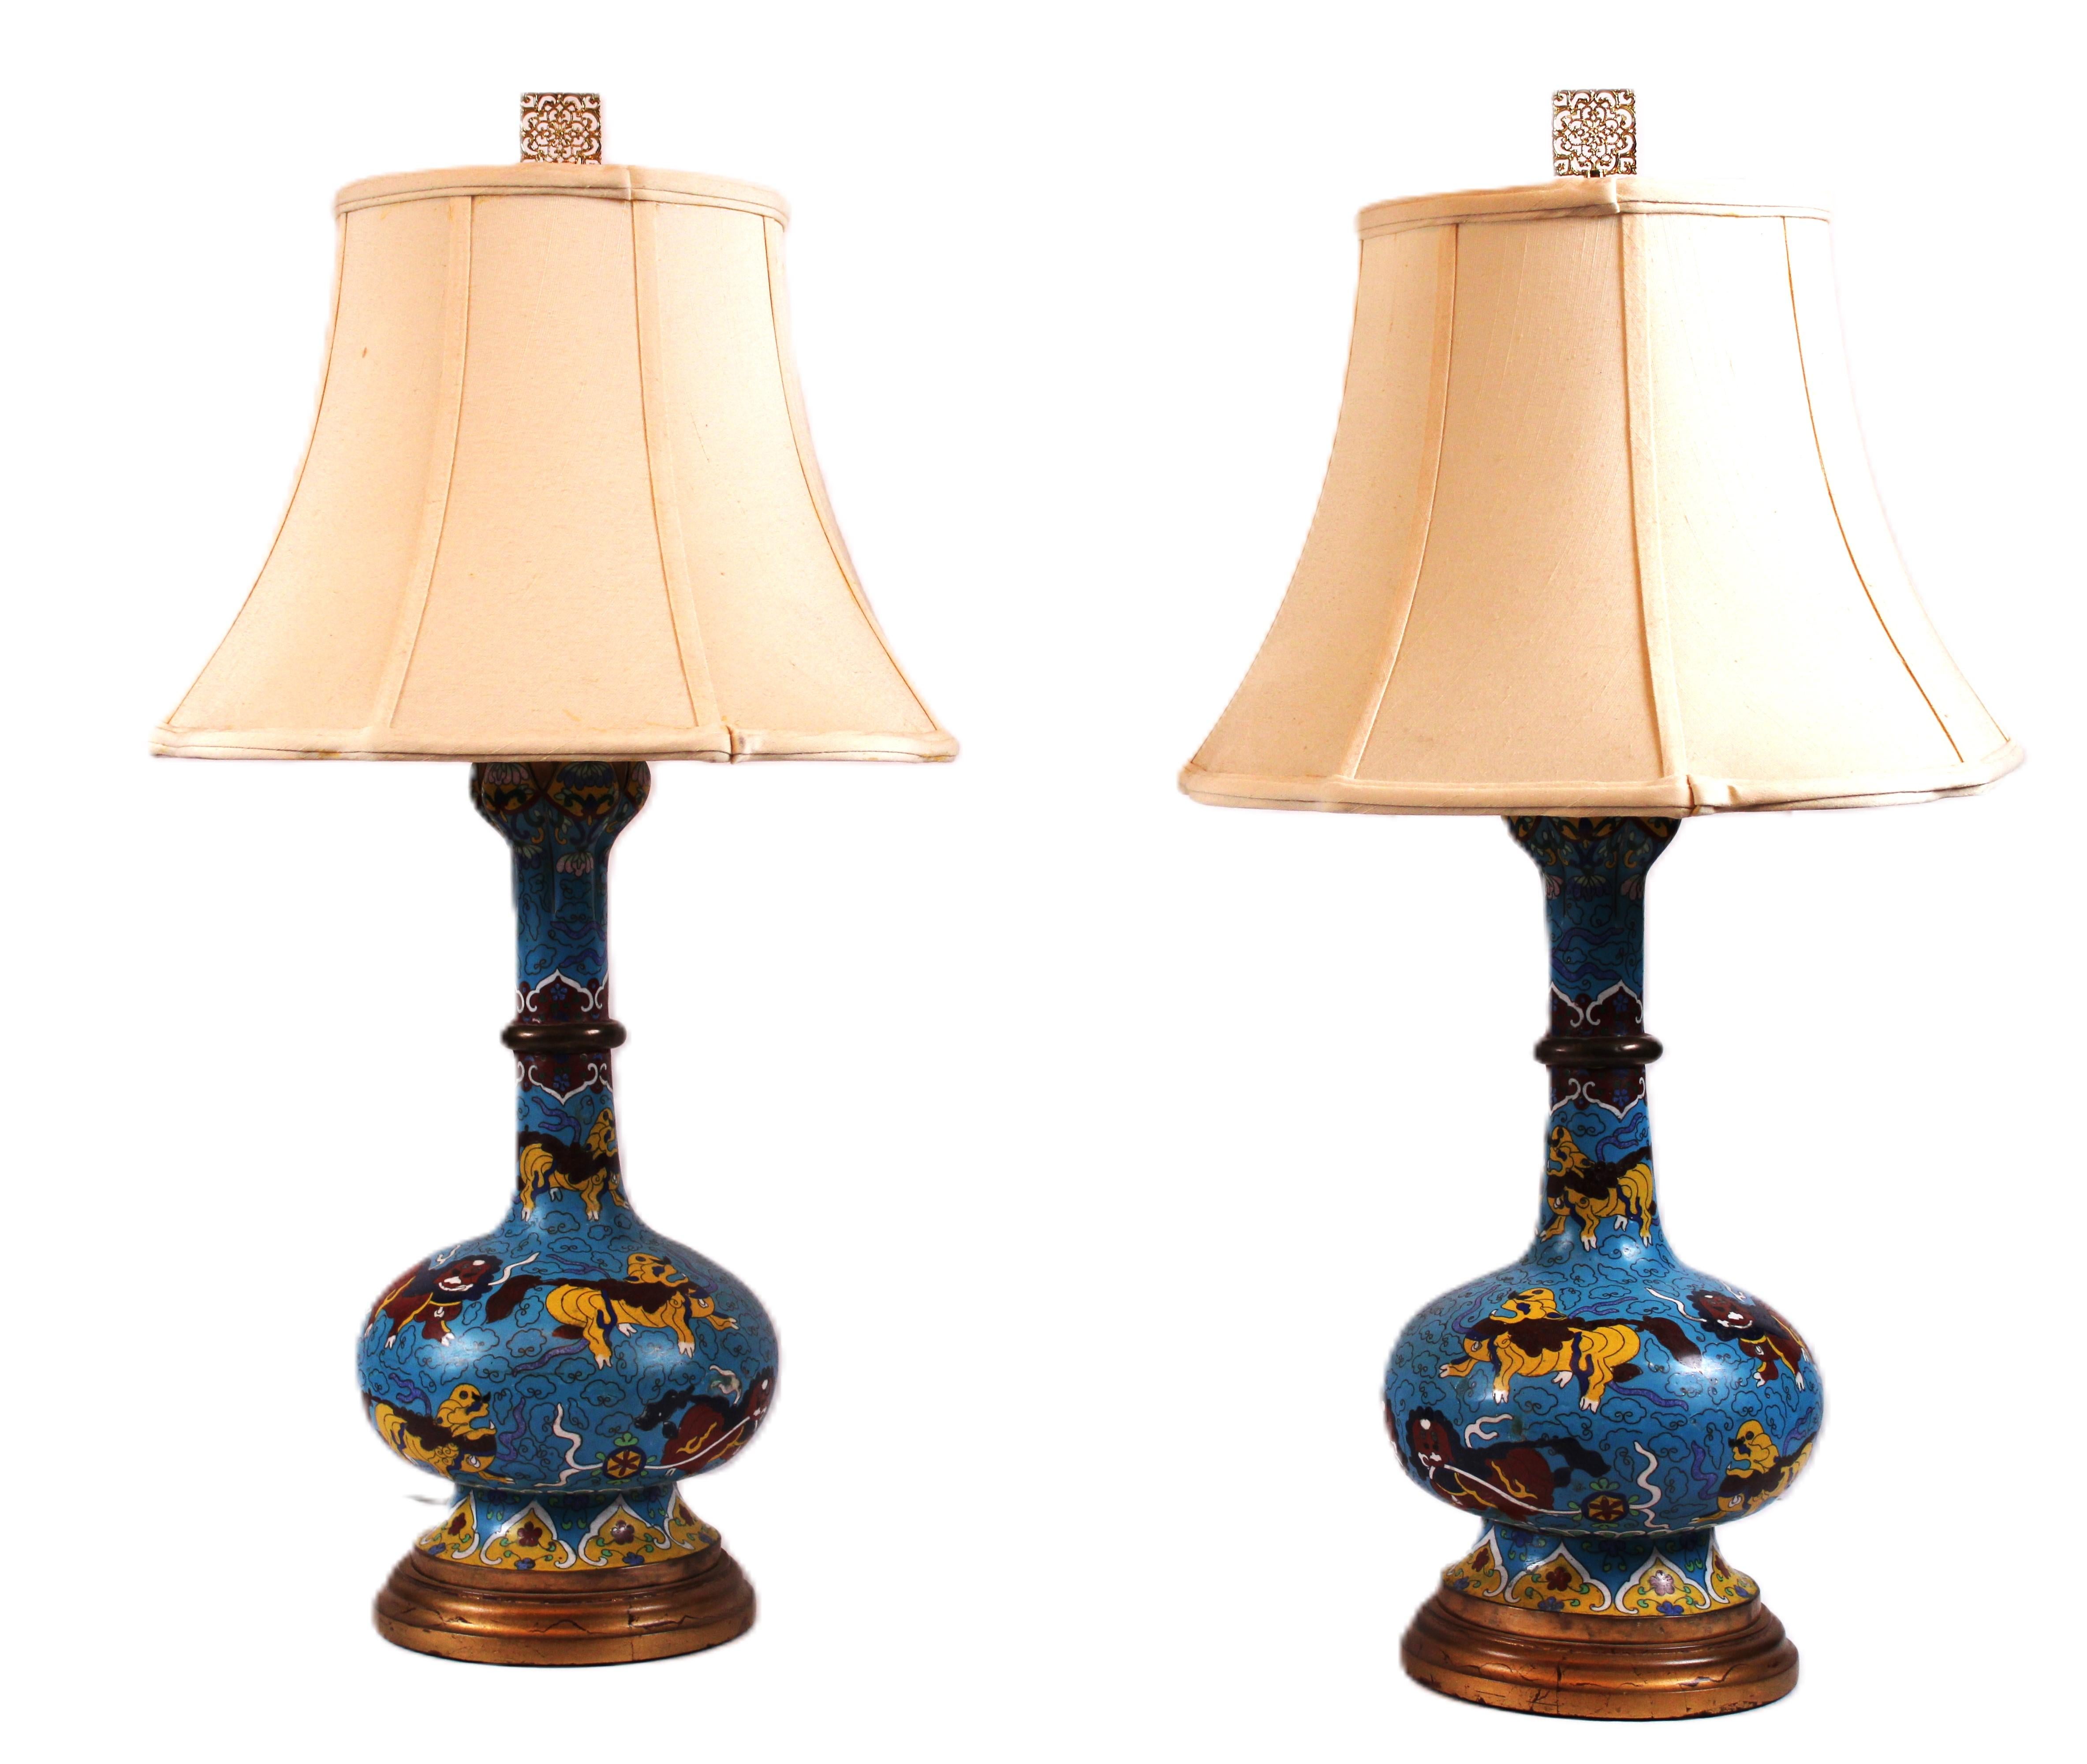 These cloisonné lamps stand as a testament to timeless craftsmanship. Each lamp is a symphony of artistry, meticulously crafted by skilled hands.

The deep blue cloisonné base serves as the canvas for intricate golden motifs. The enamels,